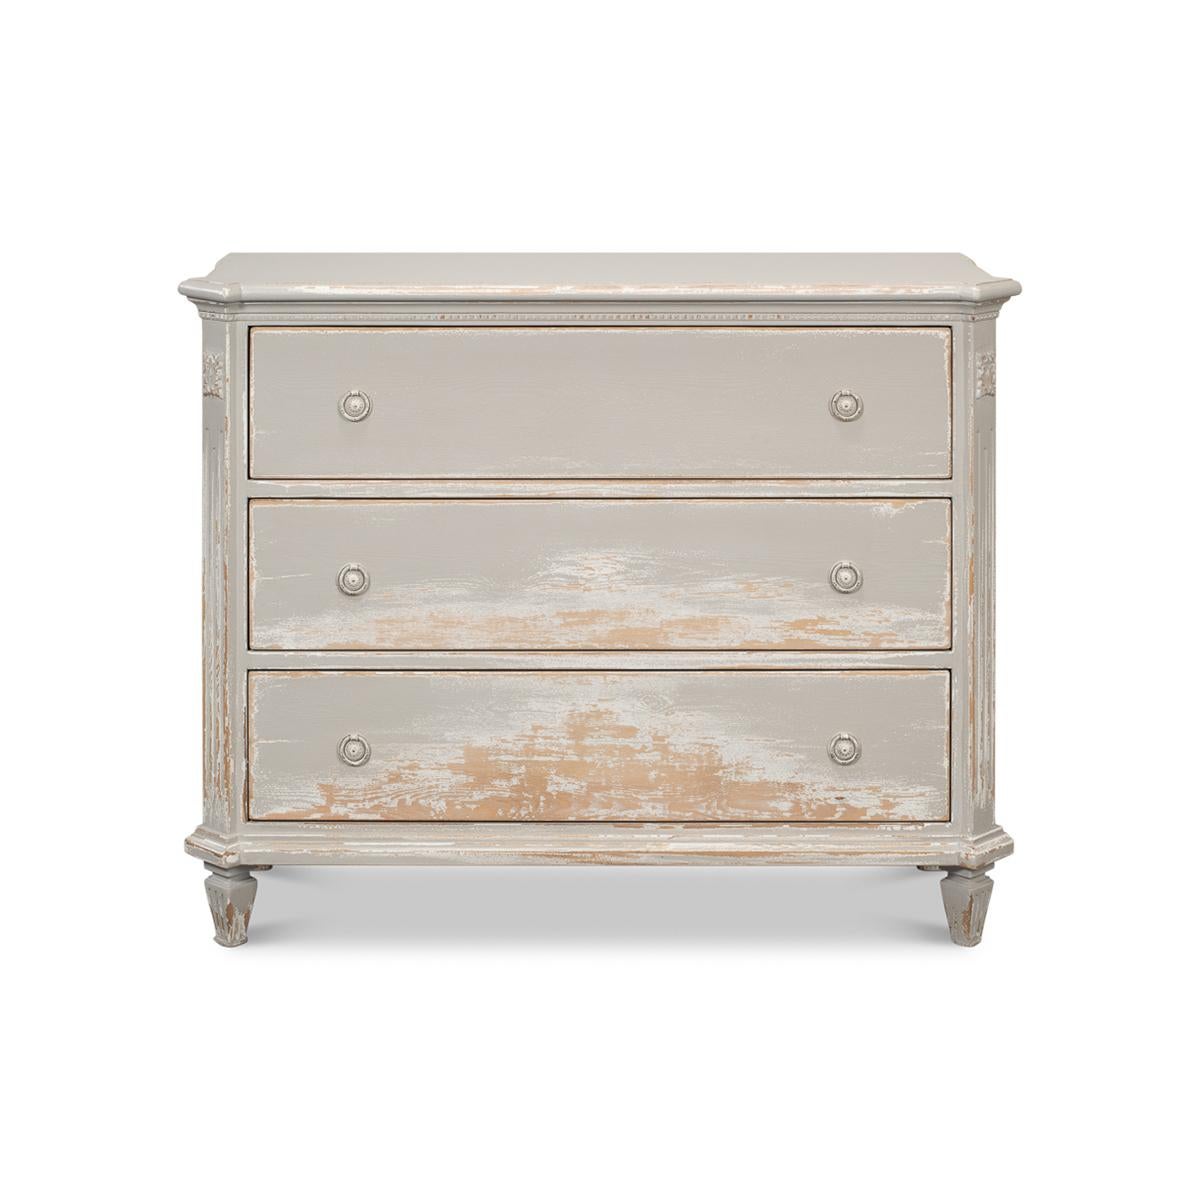 Made with reclaimed pine and finished in a distressed and antiqued gray paint. With a molded edge top having canted corners, fluted styles above square tapered and fluted legs.

Dimensions: 47